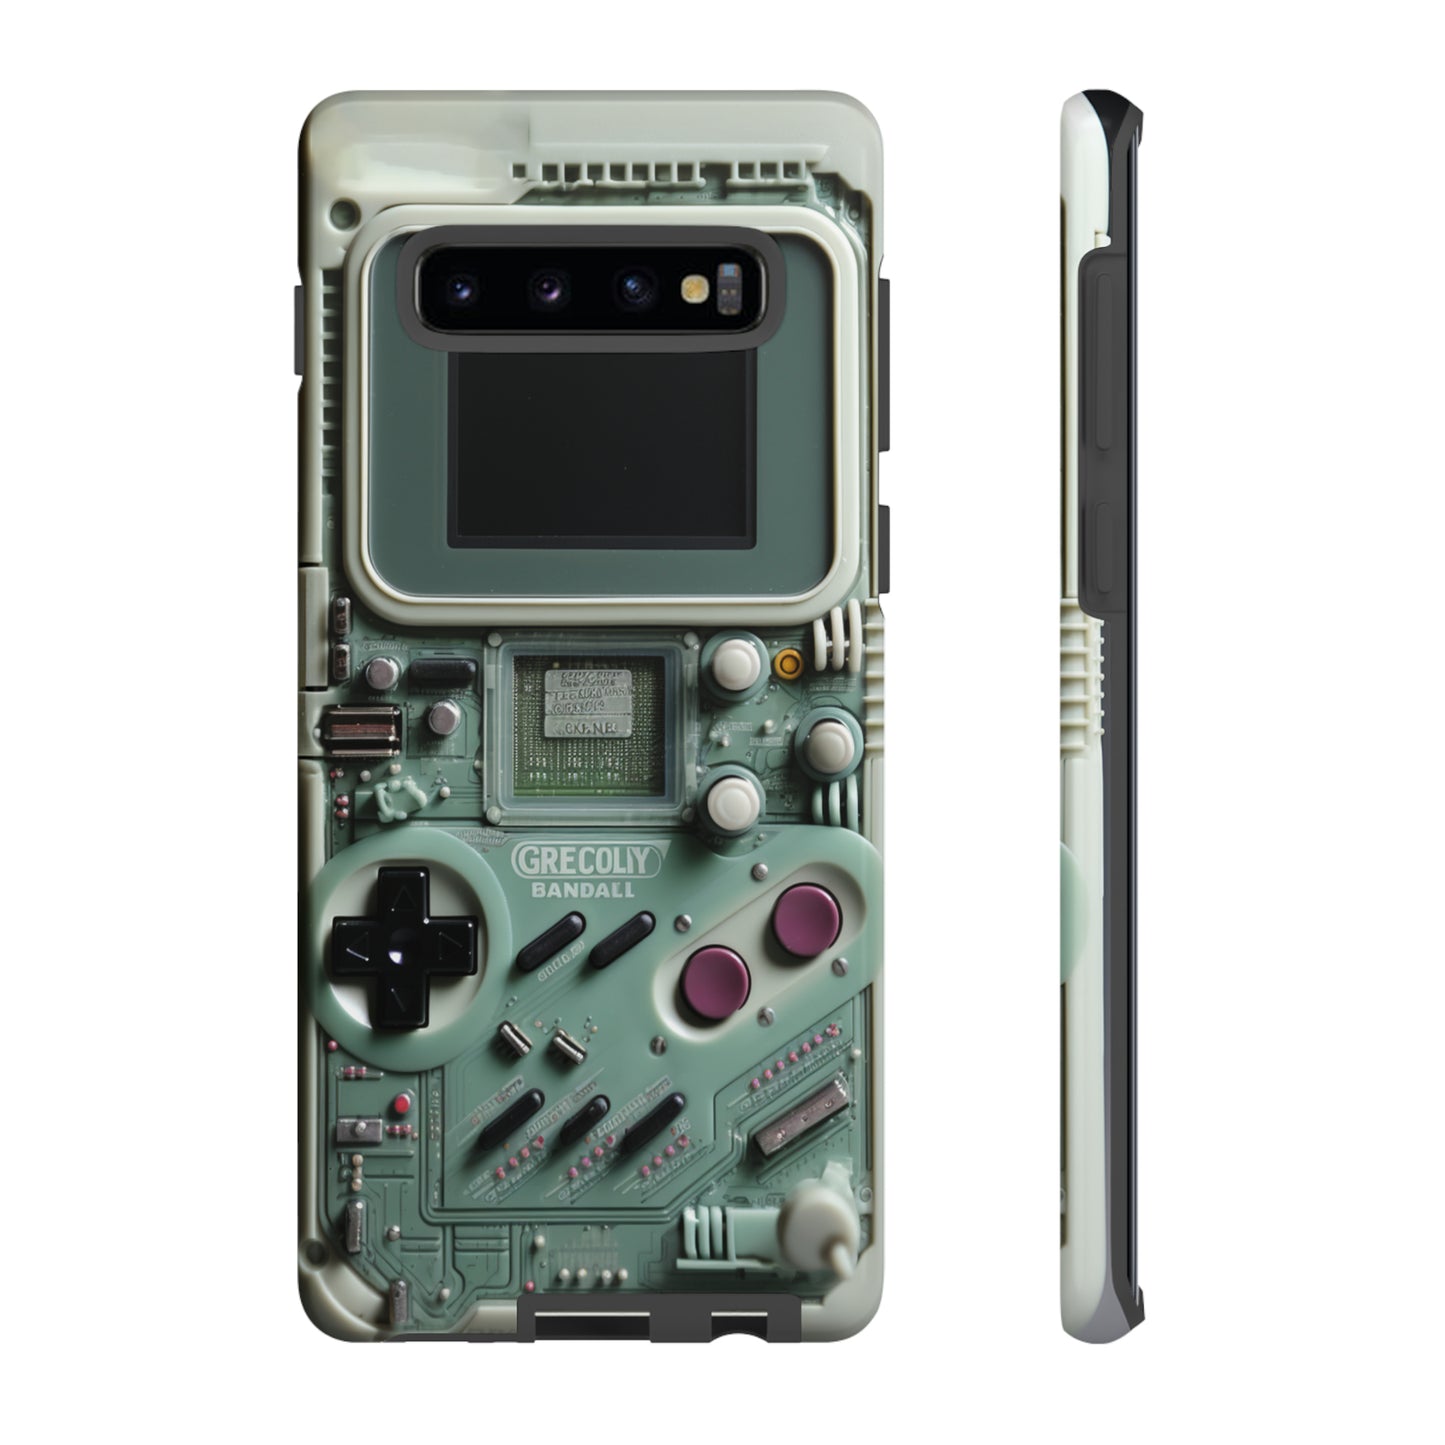 Iconic Game Boy design phone case for Google Pixel